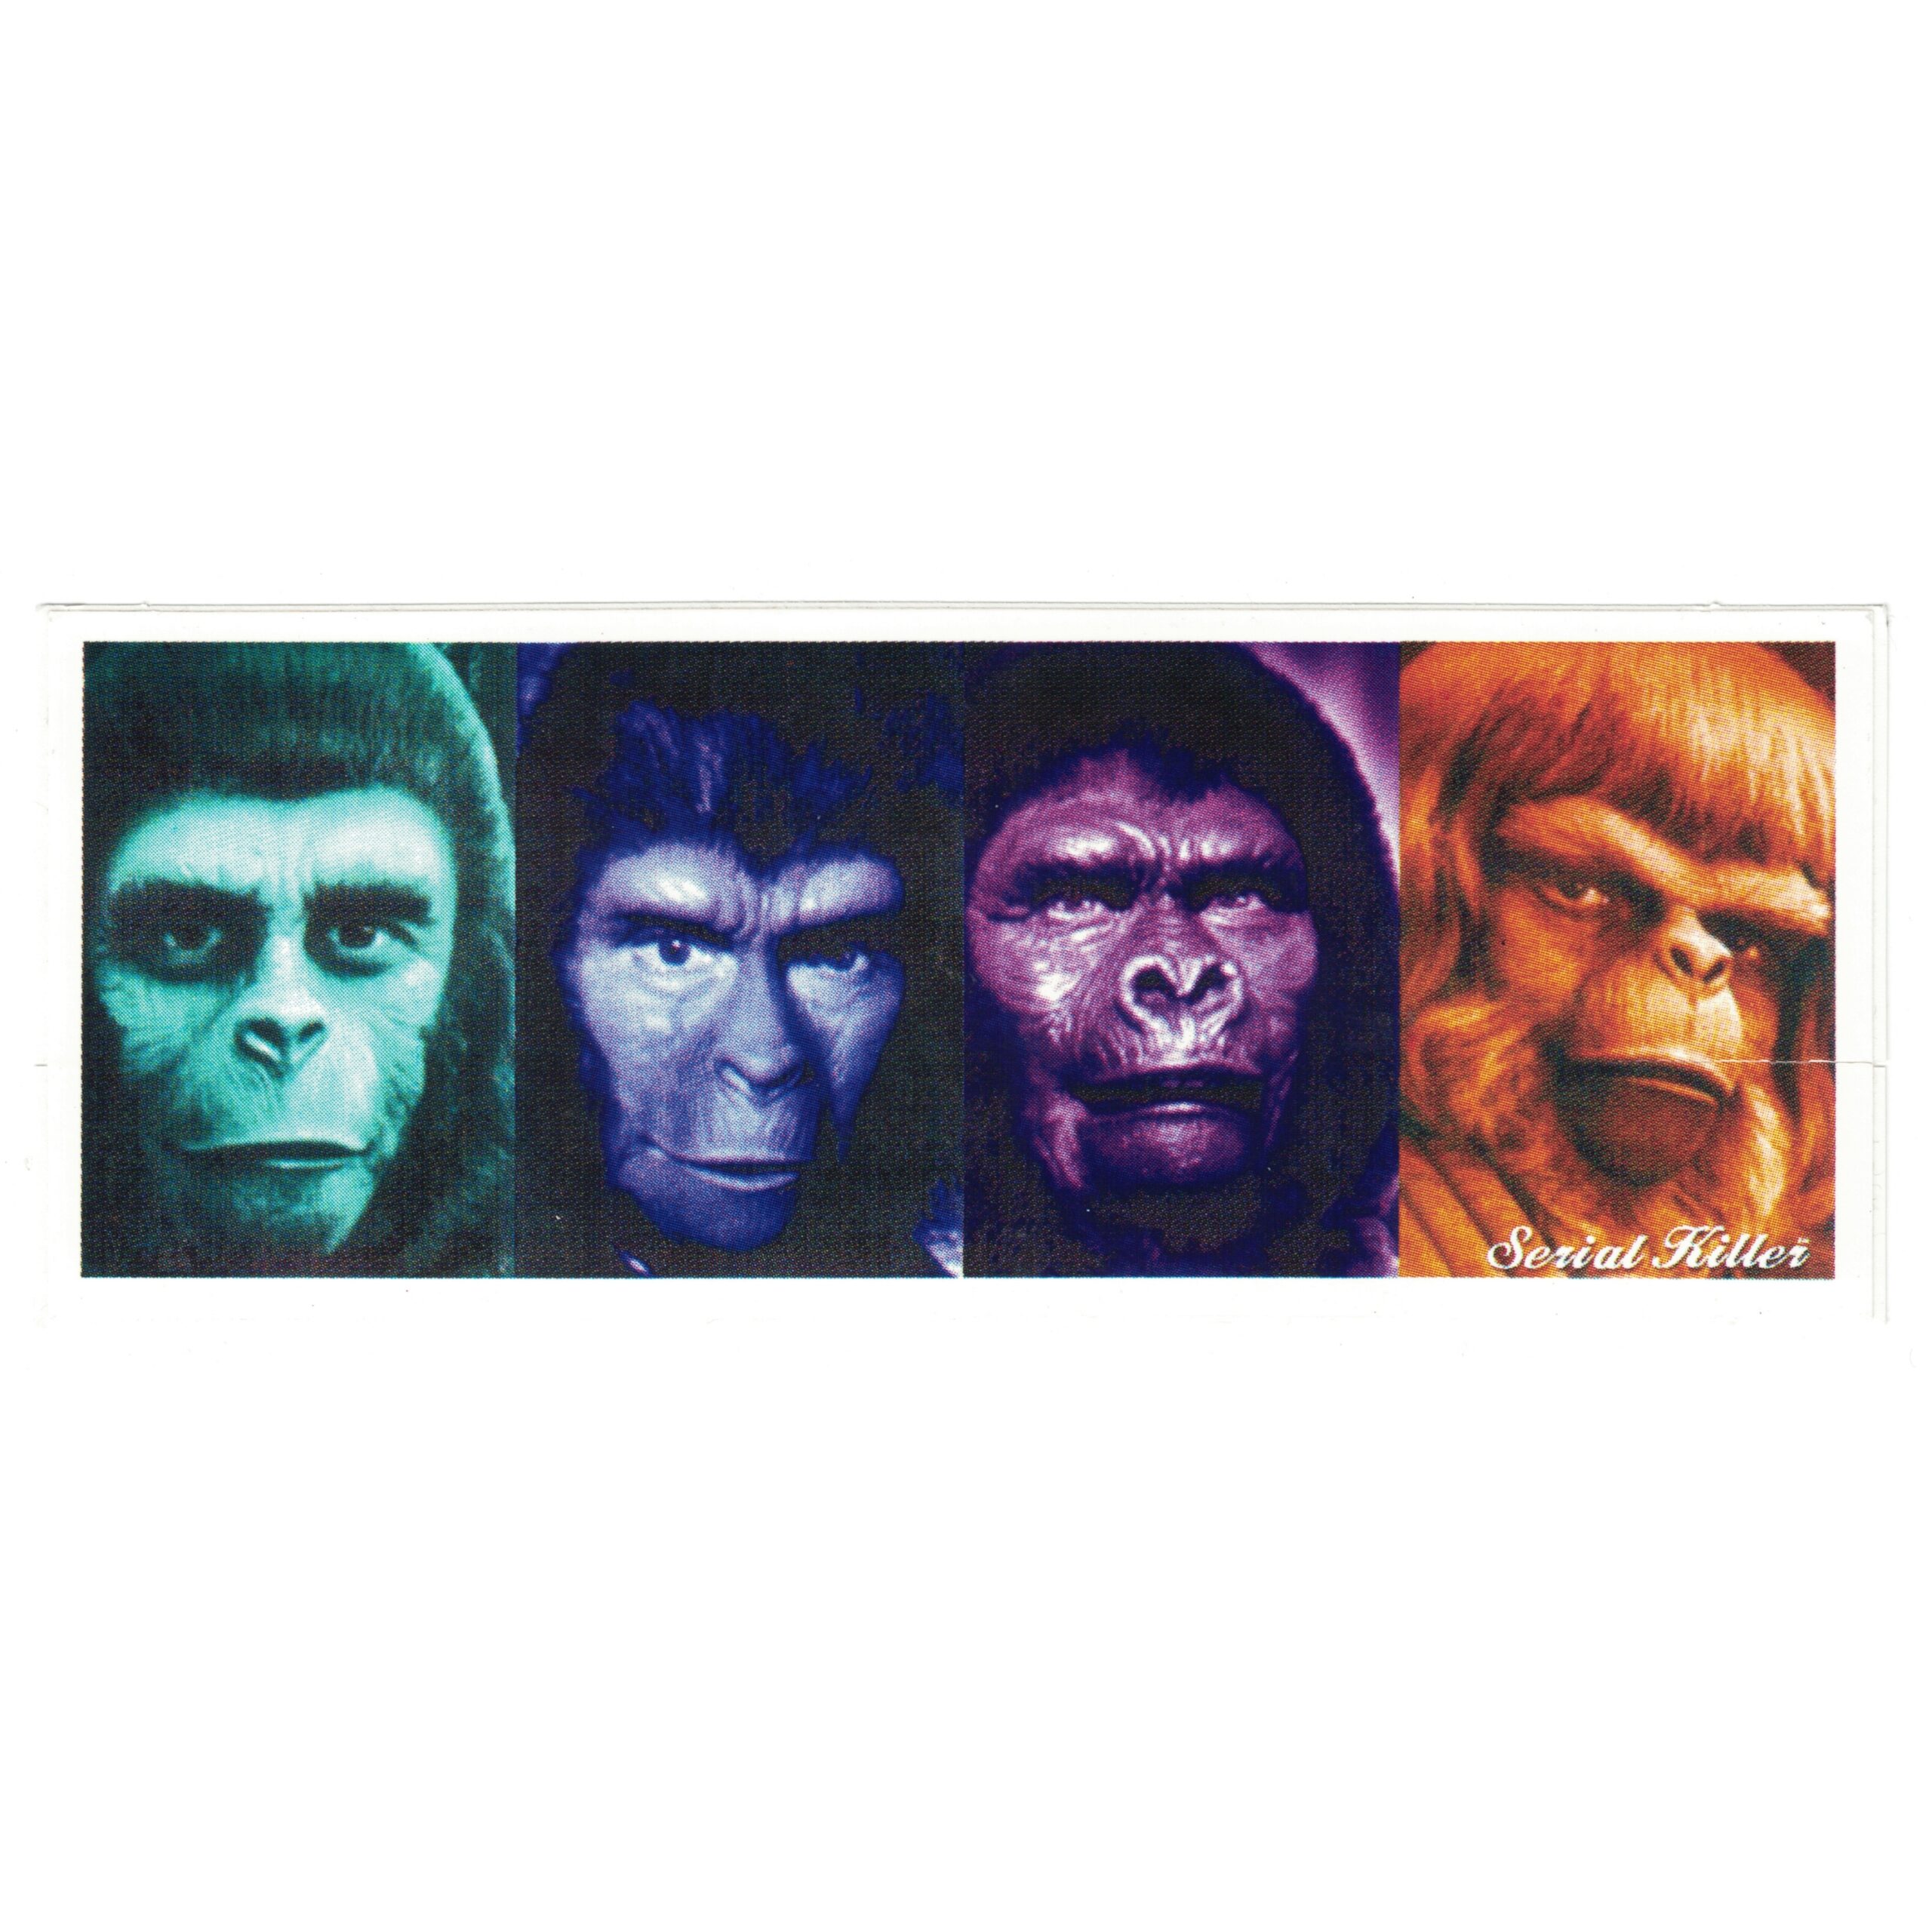 Serial Killer Planet of the Apes